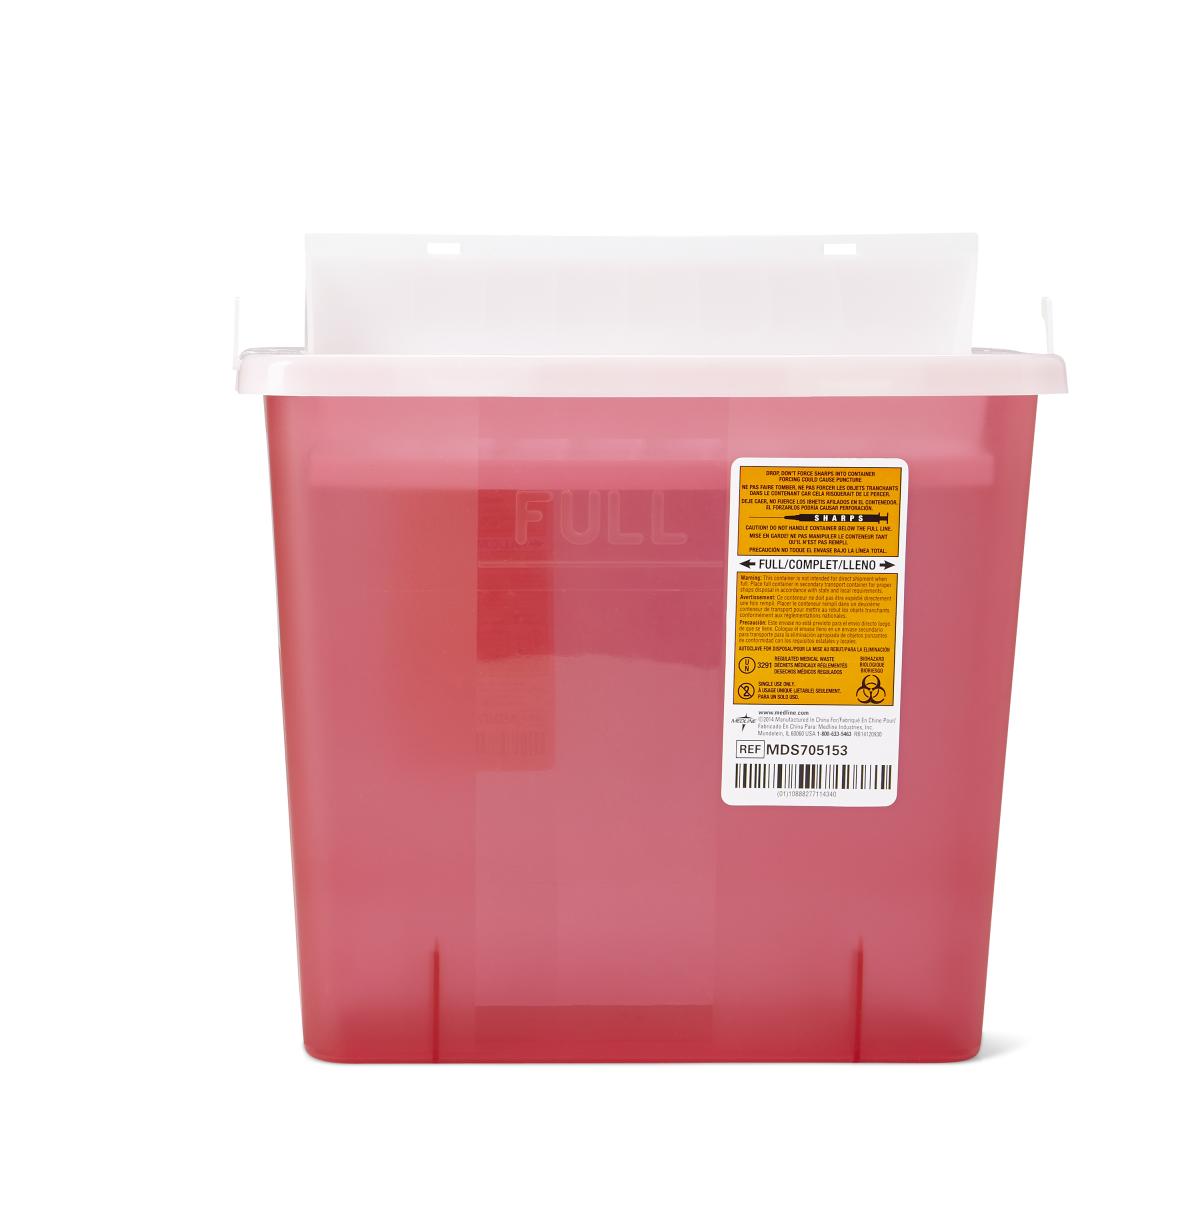 Sharps Container Refill - 5 Quart - Wall Mount